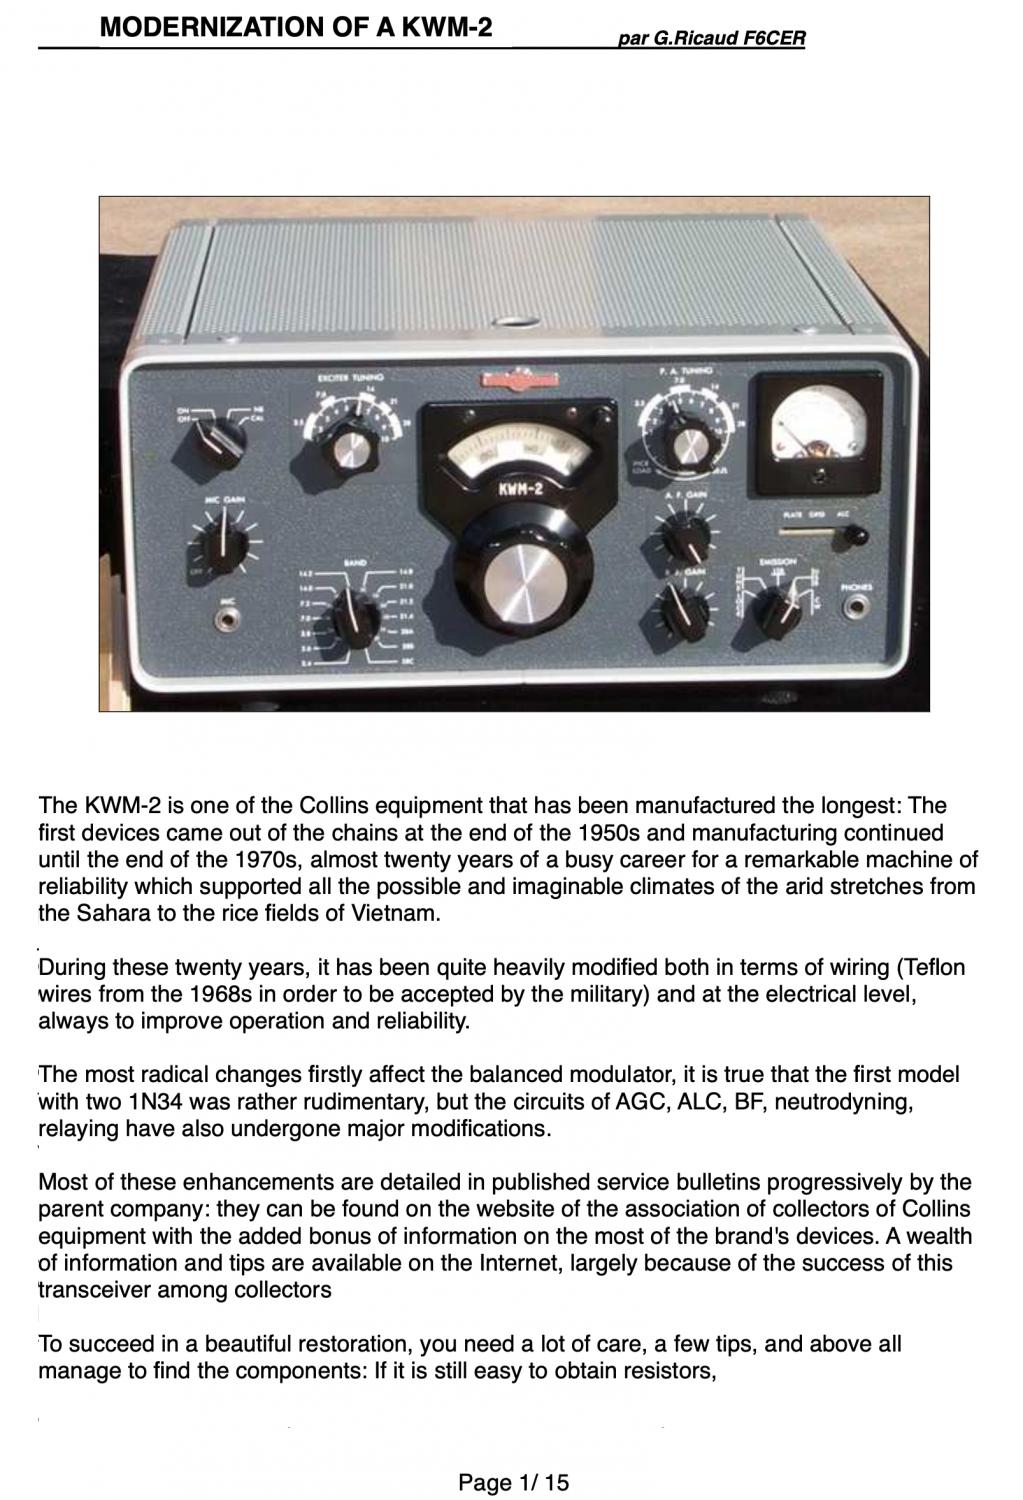 Collins KWM-2 Transceiver - Modification of a KWM-2 - G. Ricaud F6CER (English Conversion by MD0MDI)